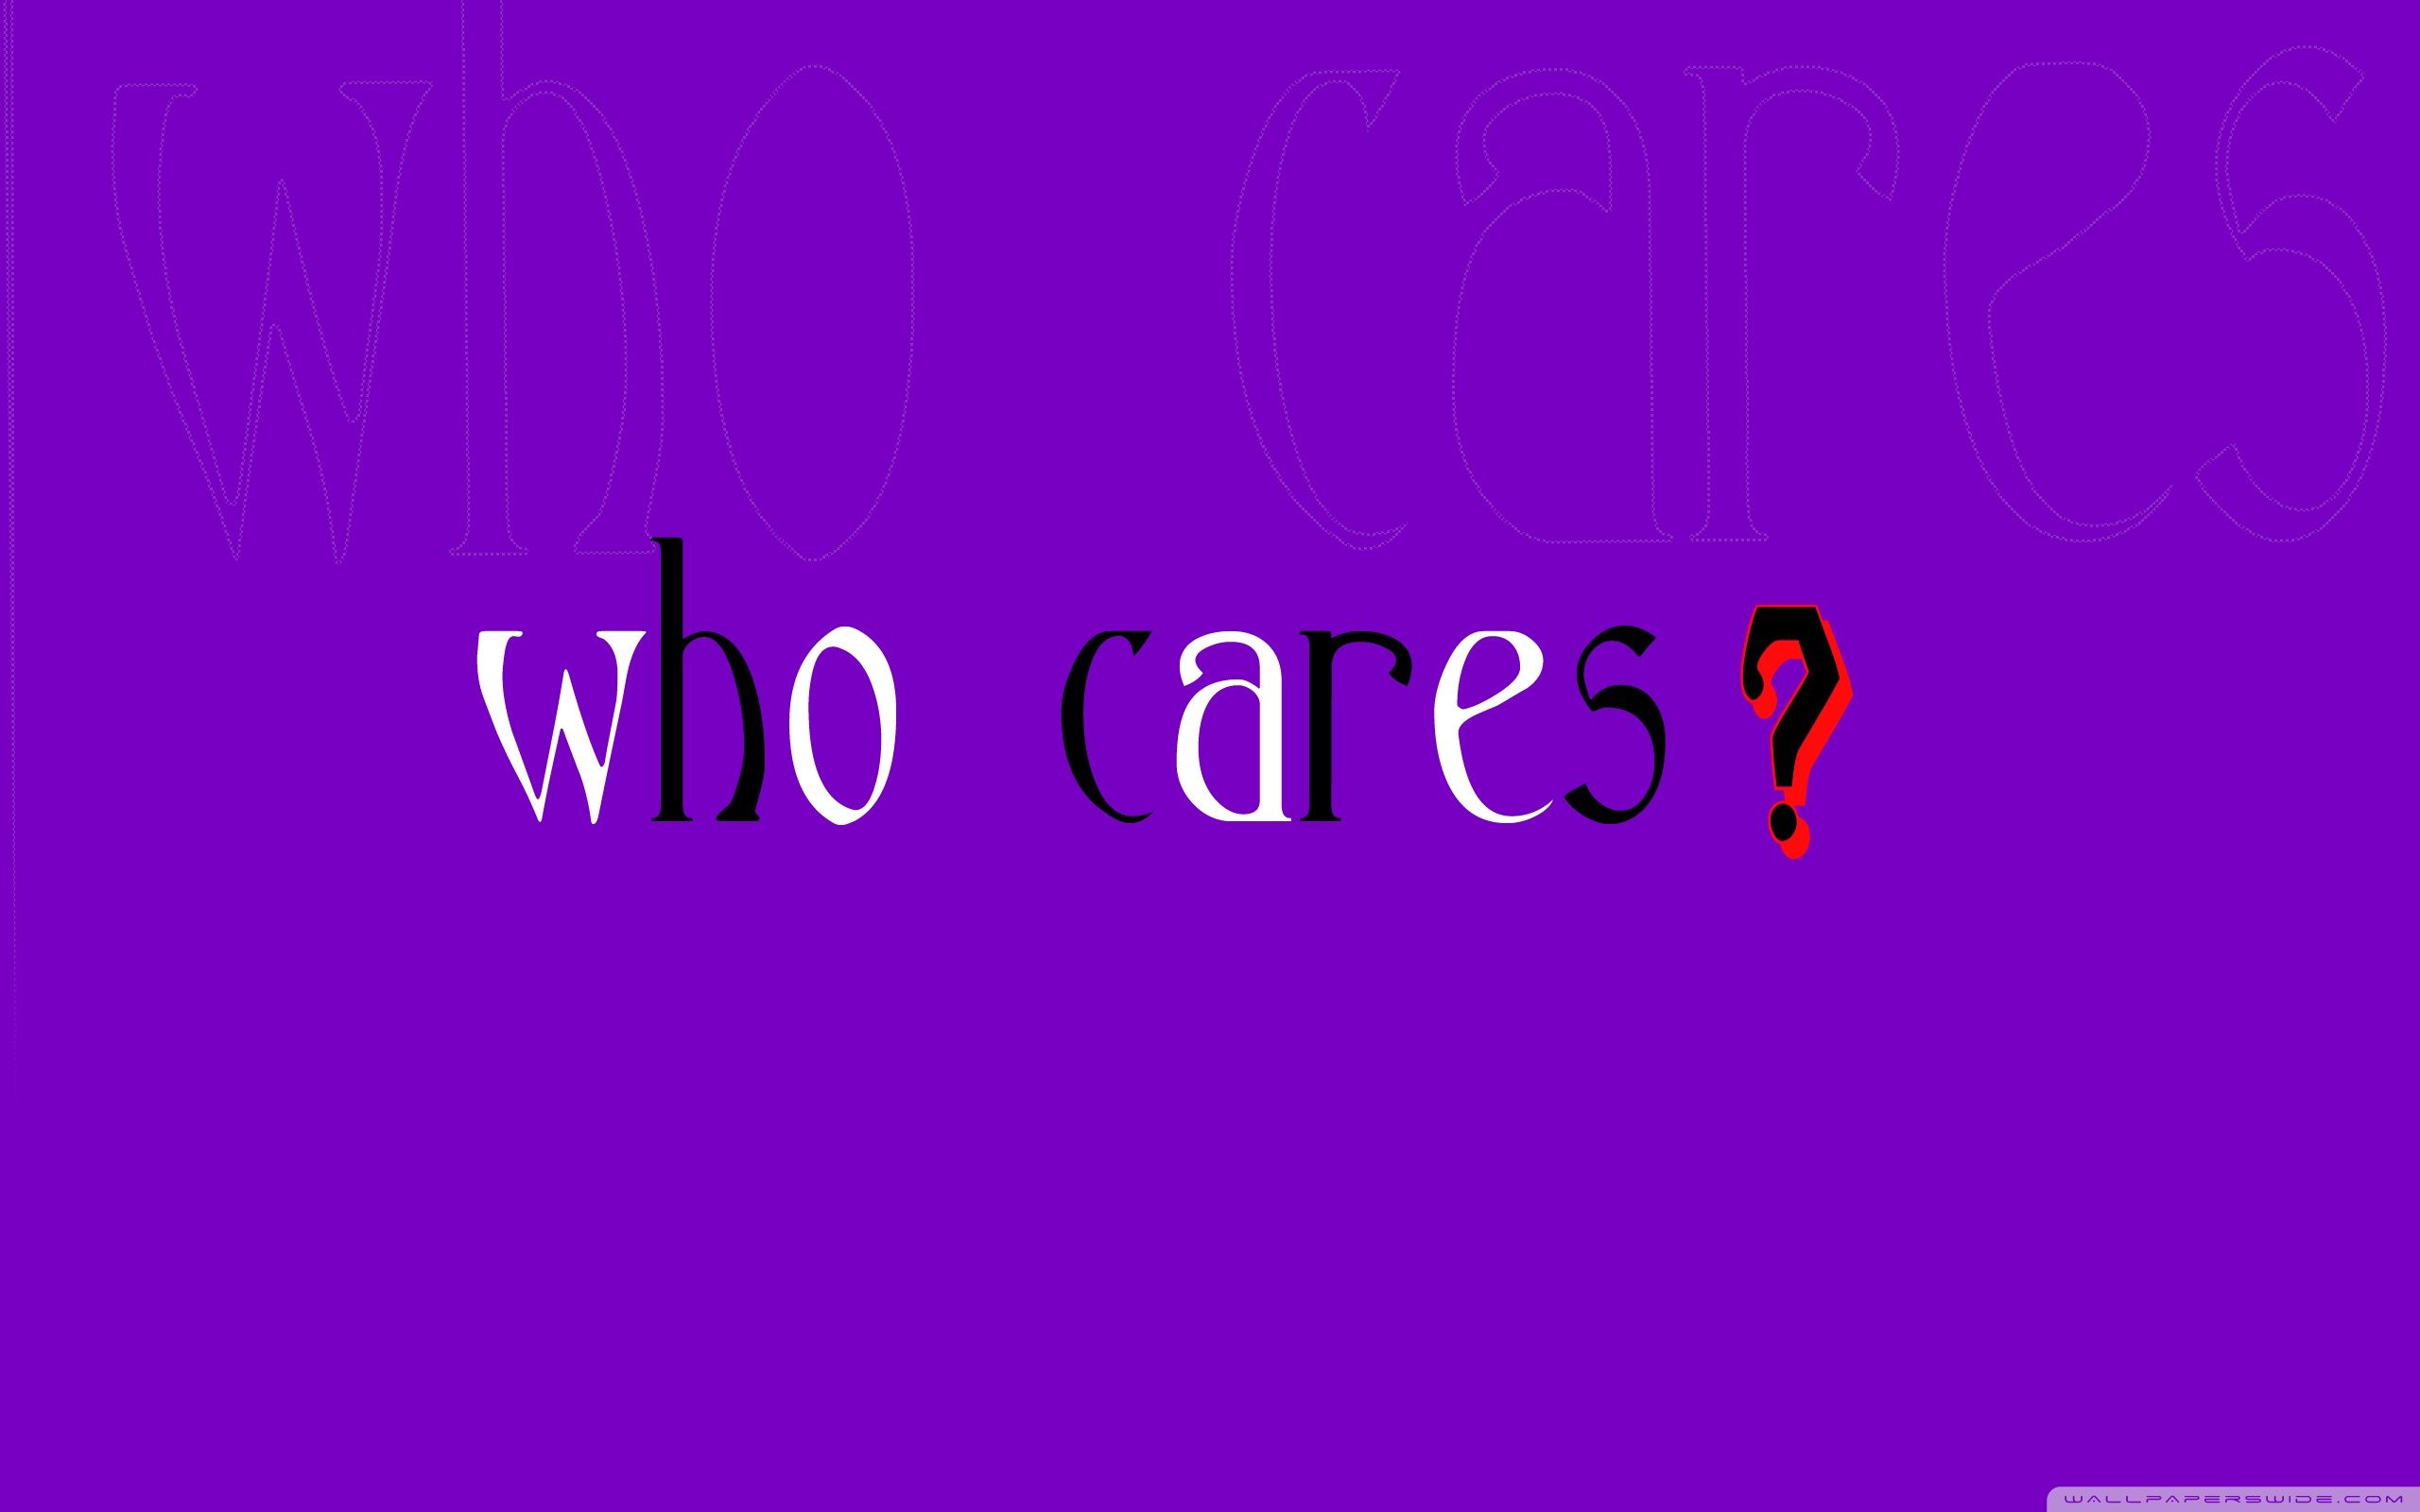 Who Cares? Ultra HD Desktop Background Wallpaper for 4K UHD TV, Multi Display, Dual Monitor, Tablet